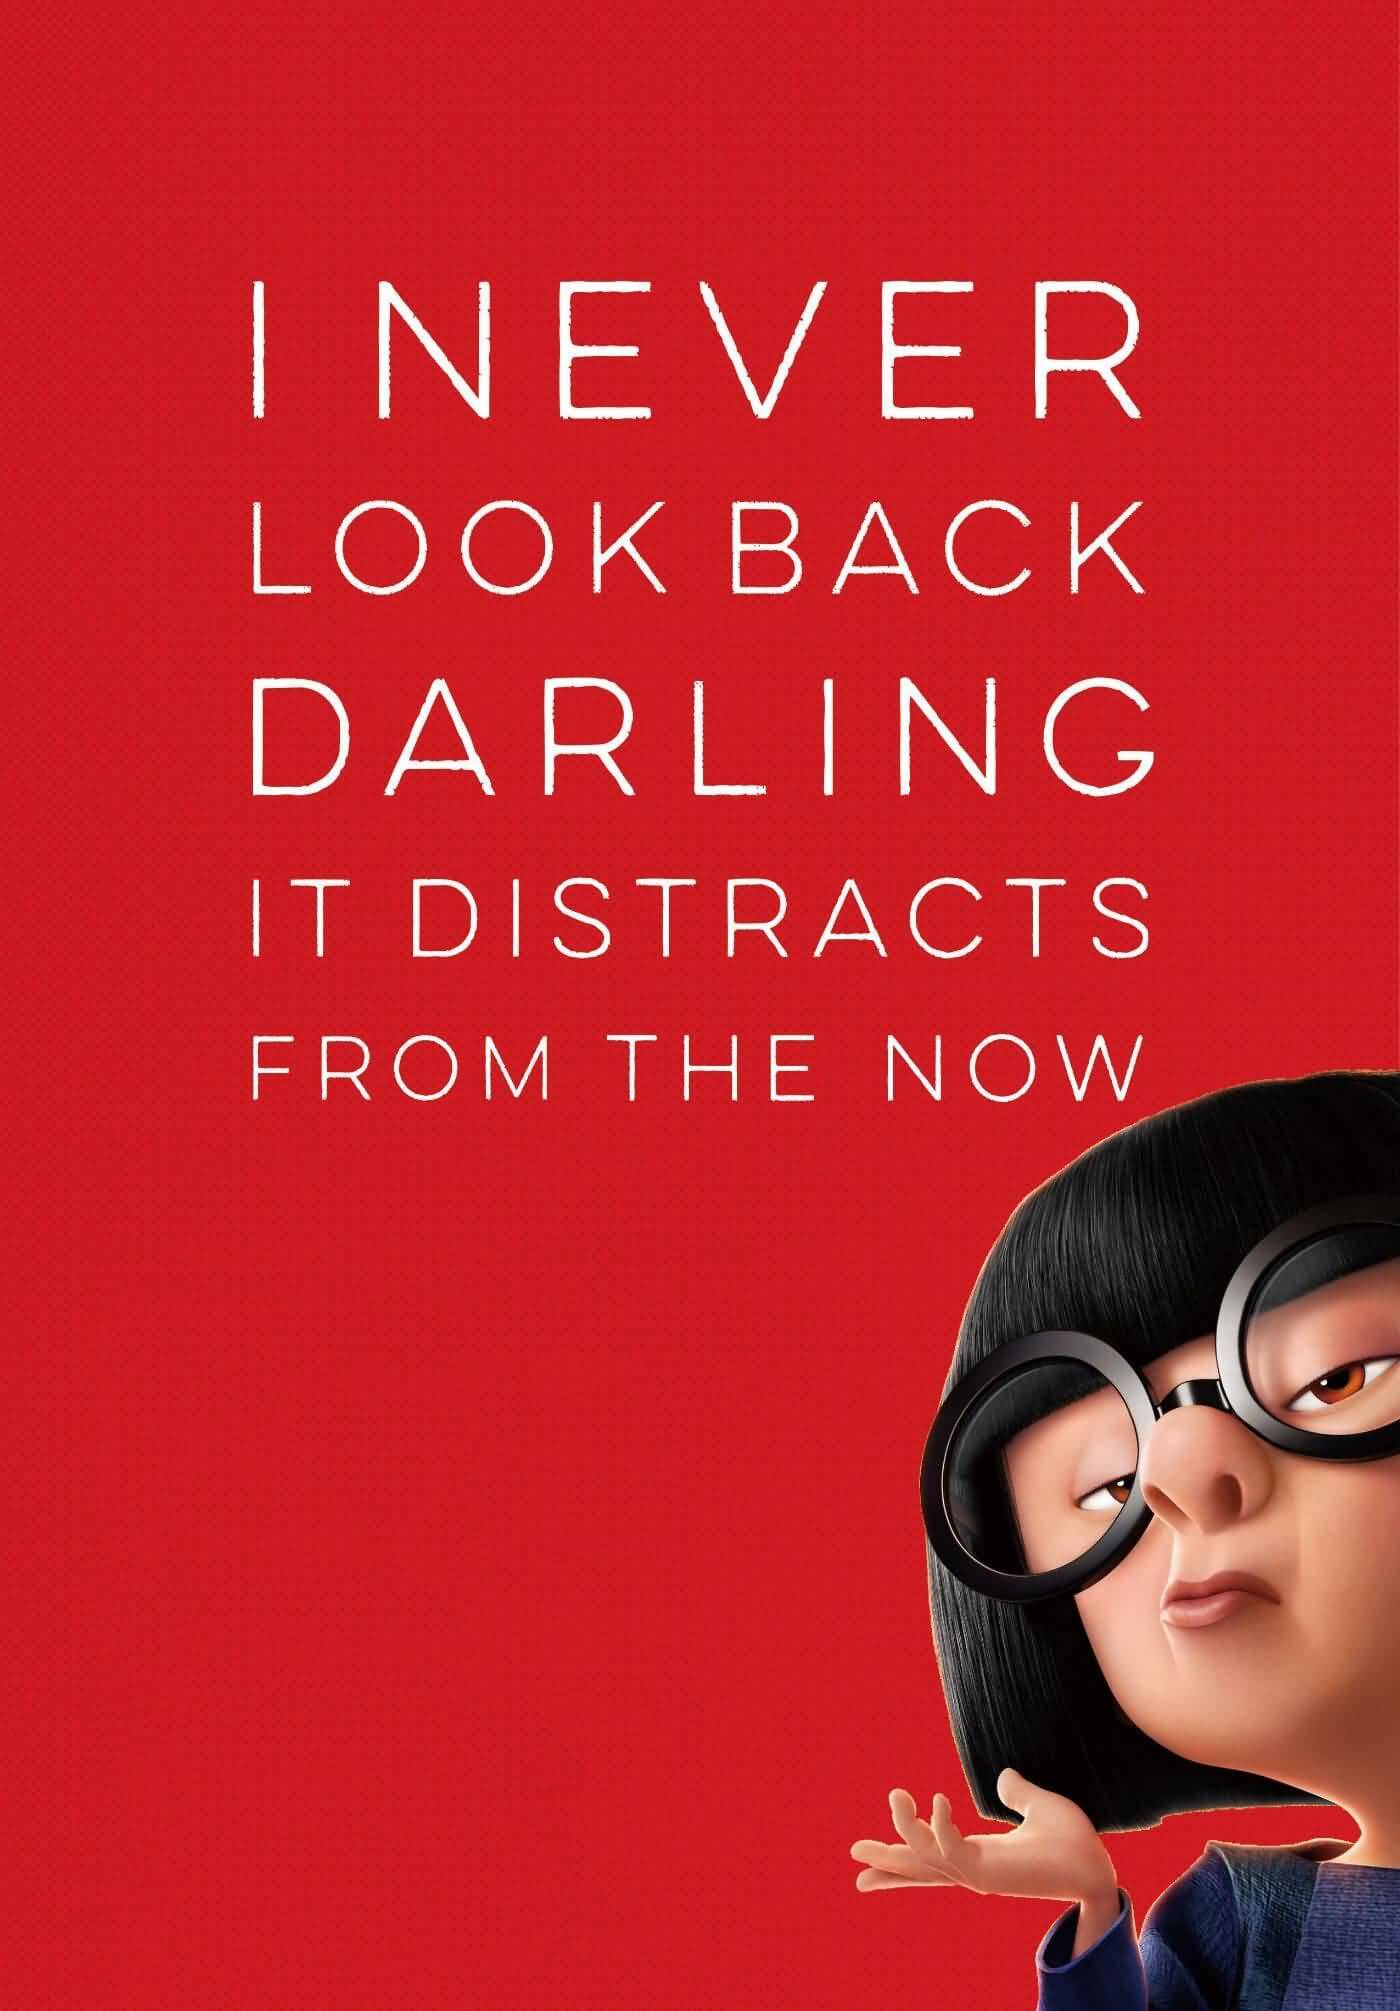 I Never Look Back Edna Mode Quotes